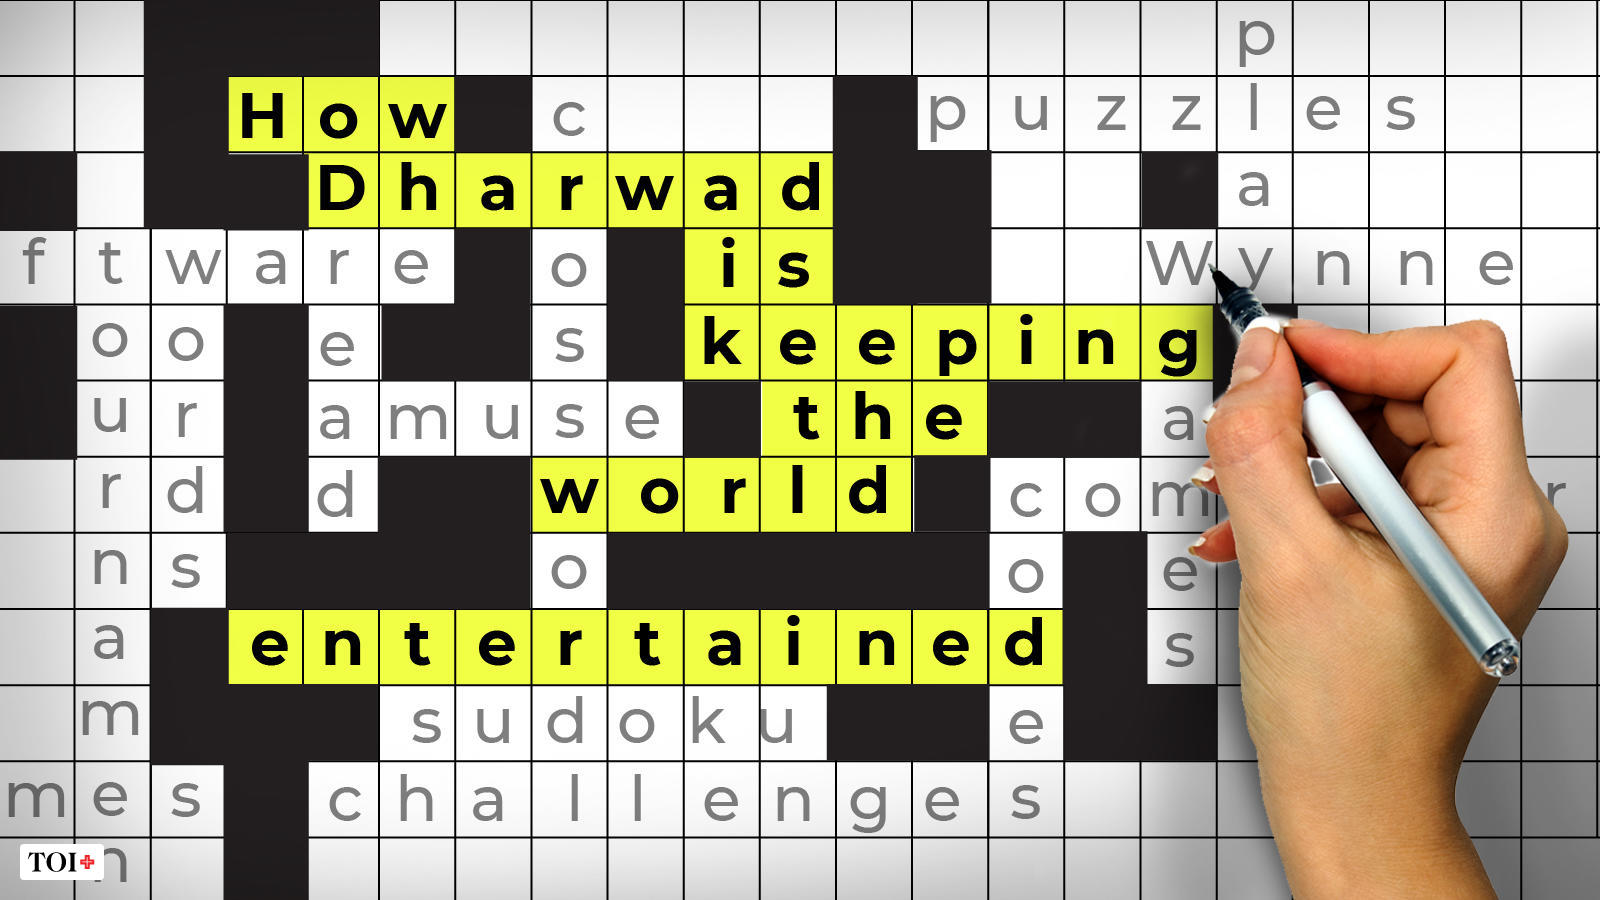 Cryptic crosswords: A puzzling British obsession - BBC Culture